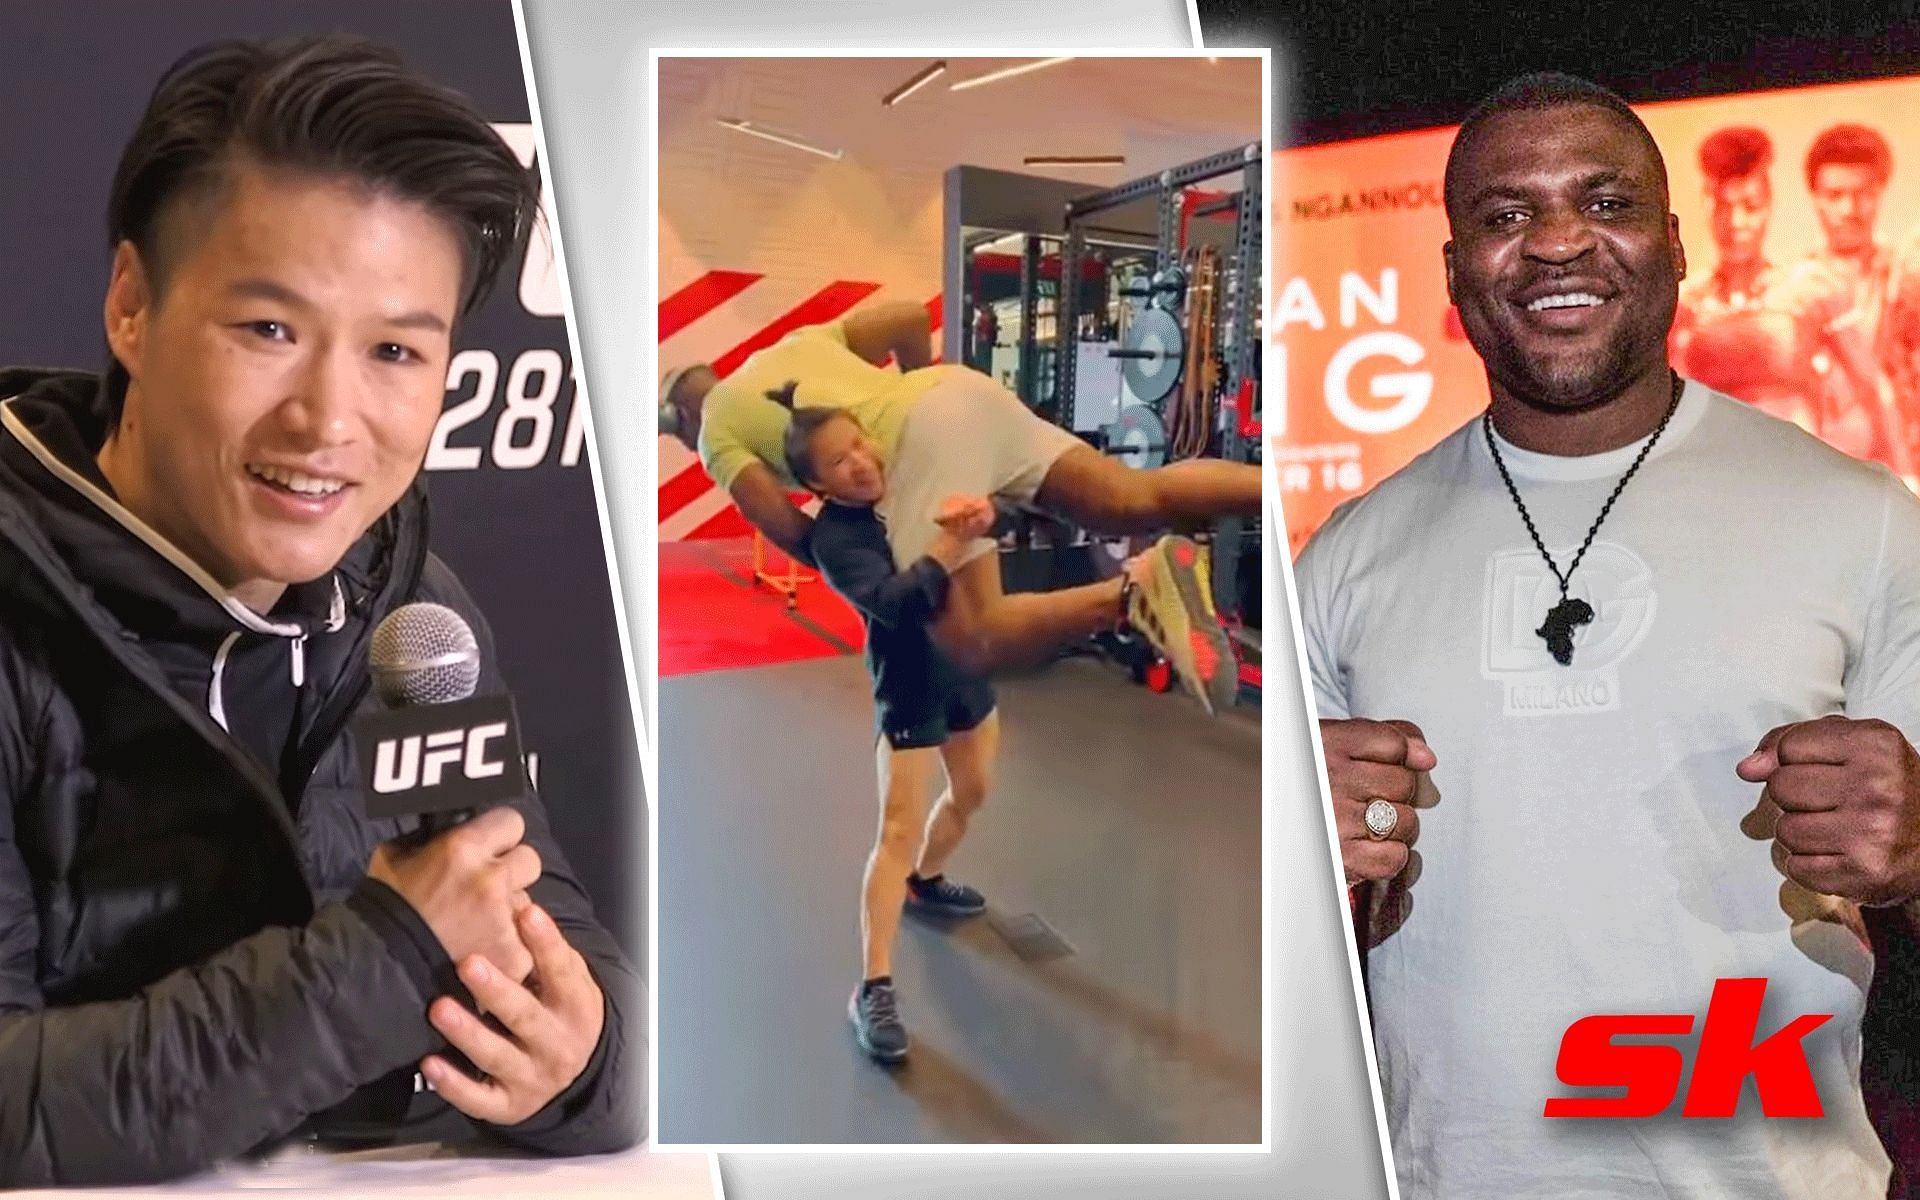 Zhang Weili (left) Zhang Weili and Francis Ngannou (middle) and Francis Ngannou (right) [Image Courtesy: Zhang Weili via mmafighting on YouTube, Video and Francis Ngannou via @francisngannou on Instagram]